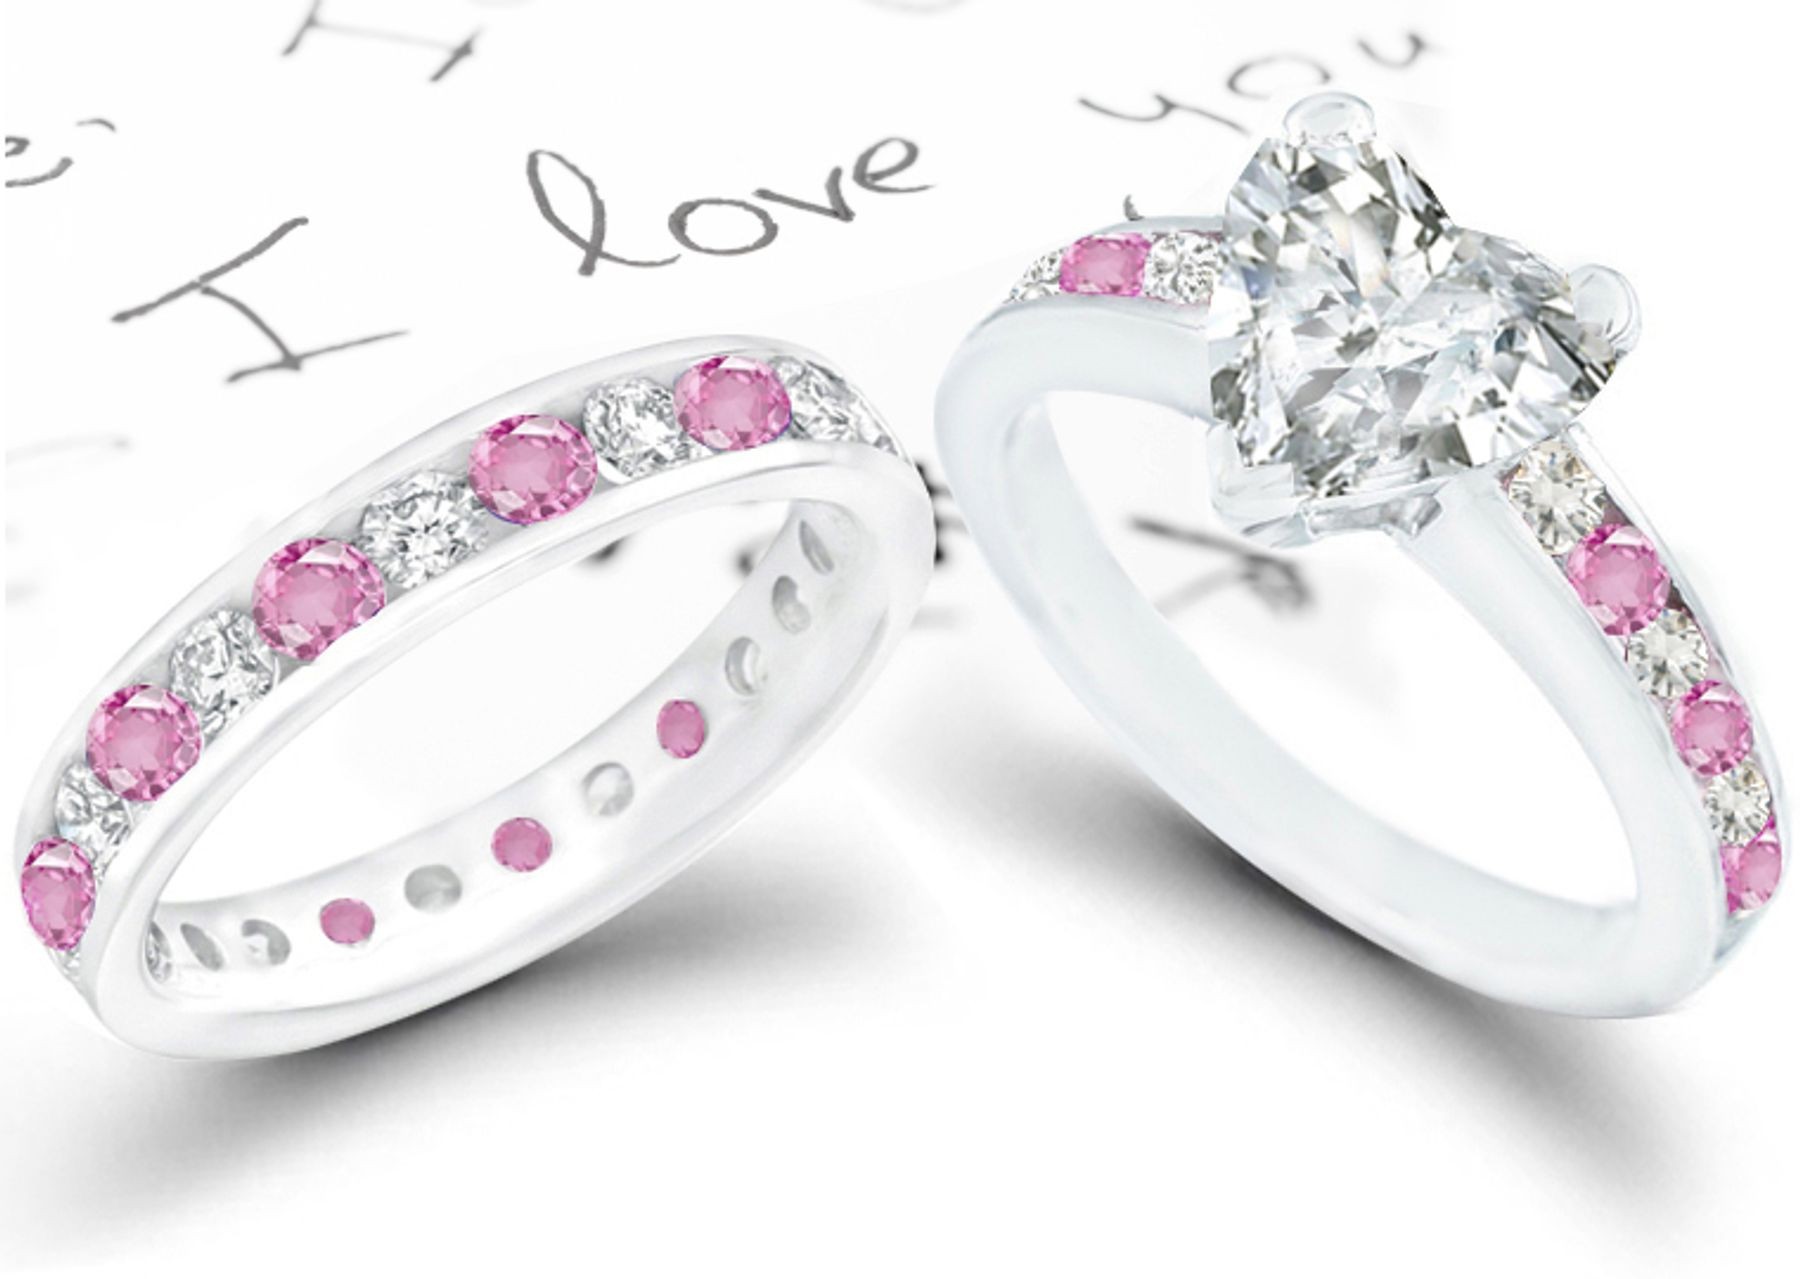 2013 Catalog No. 5 - Product Details: Heart Diamond & Pink Sapphire Engagement & Wedding Rings